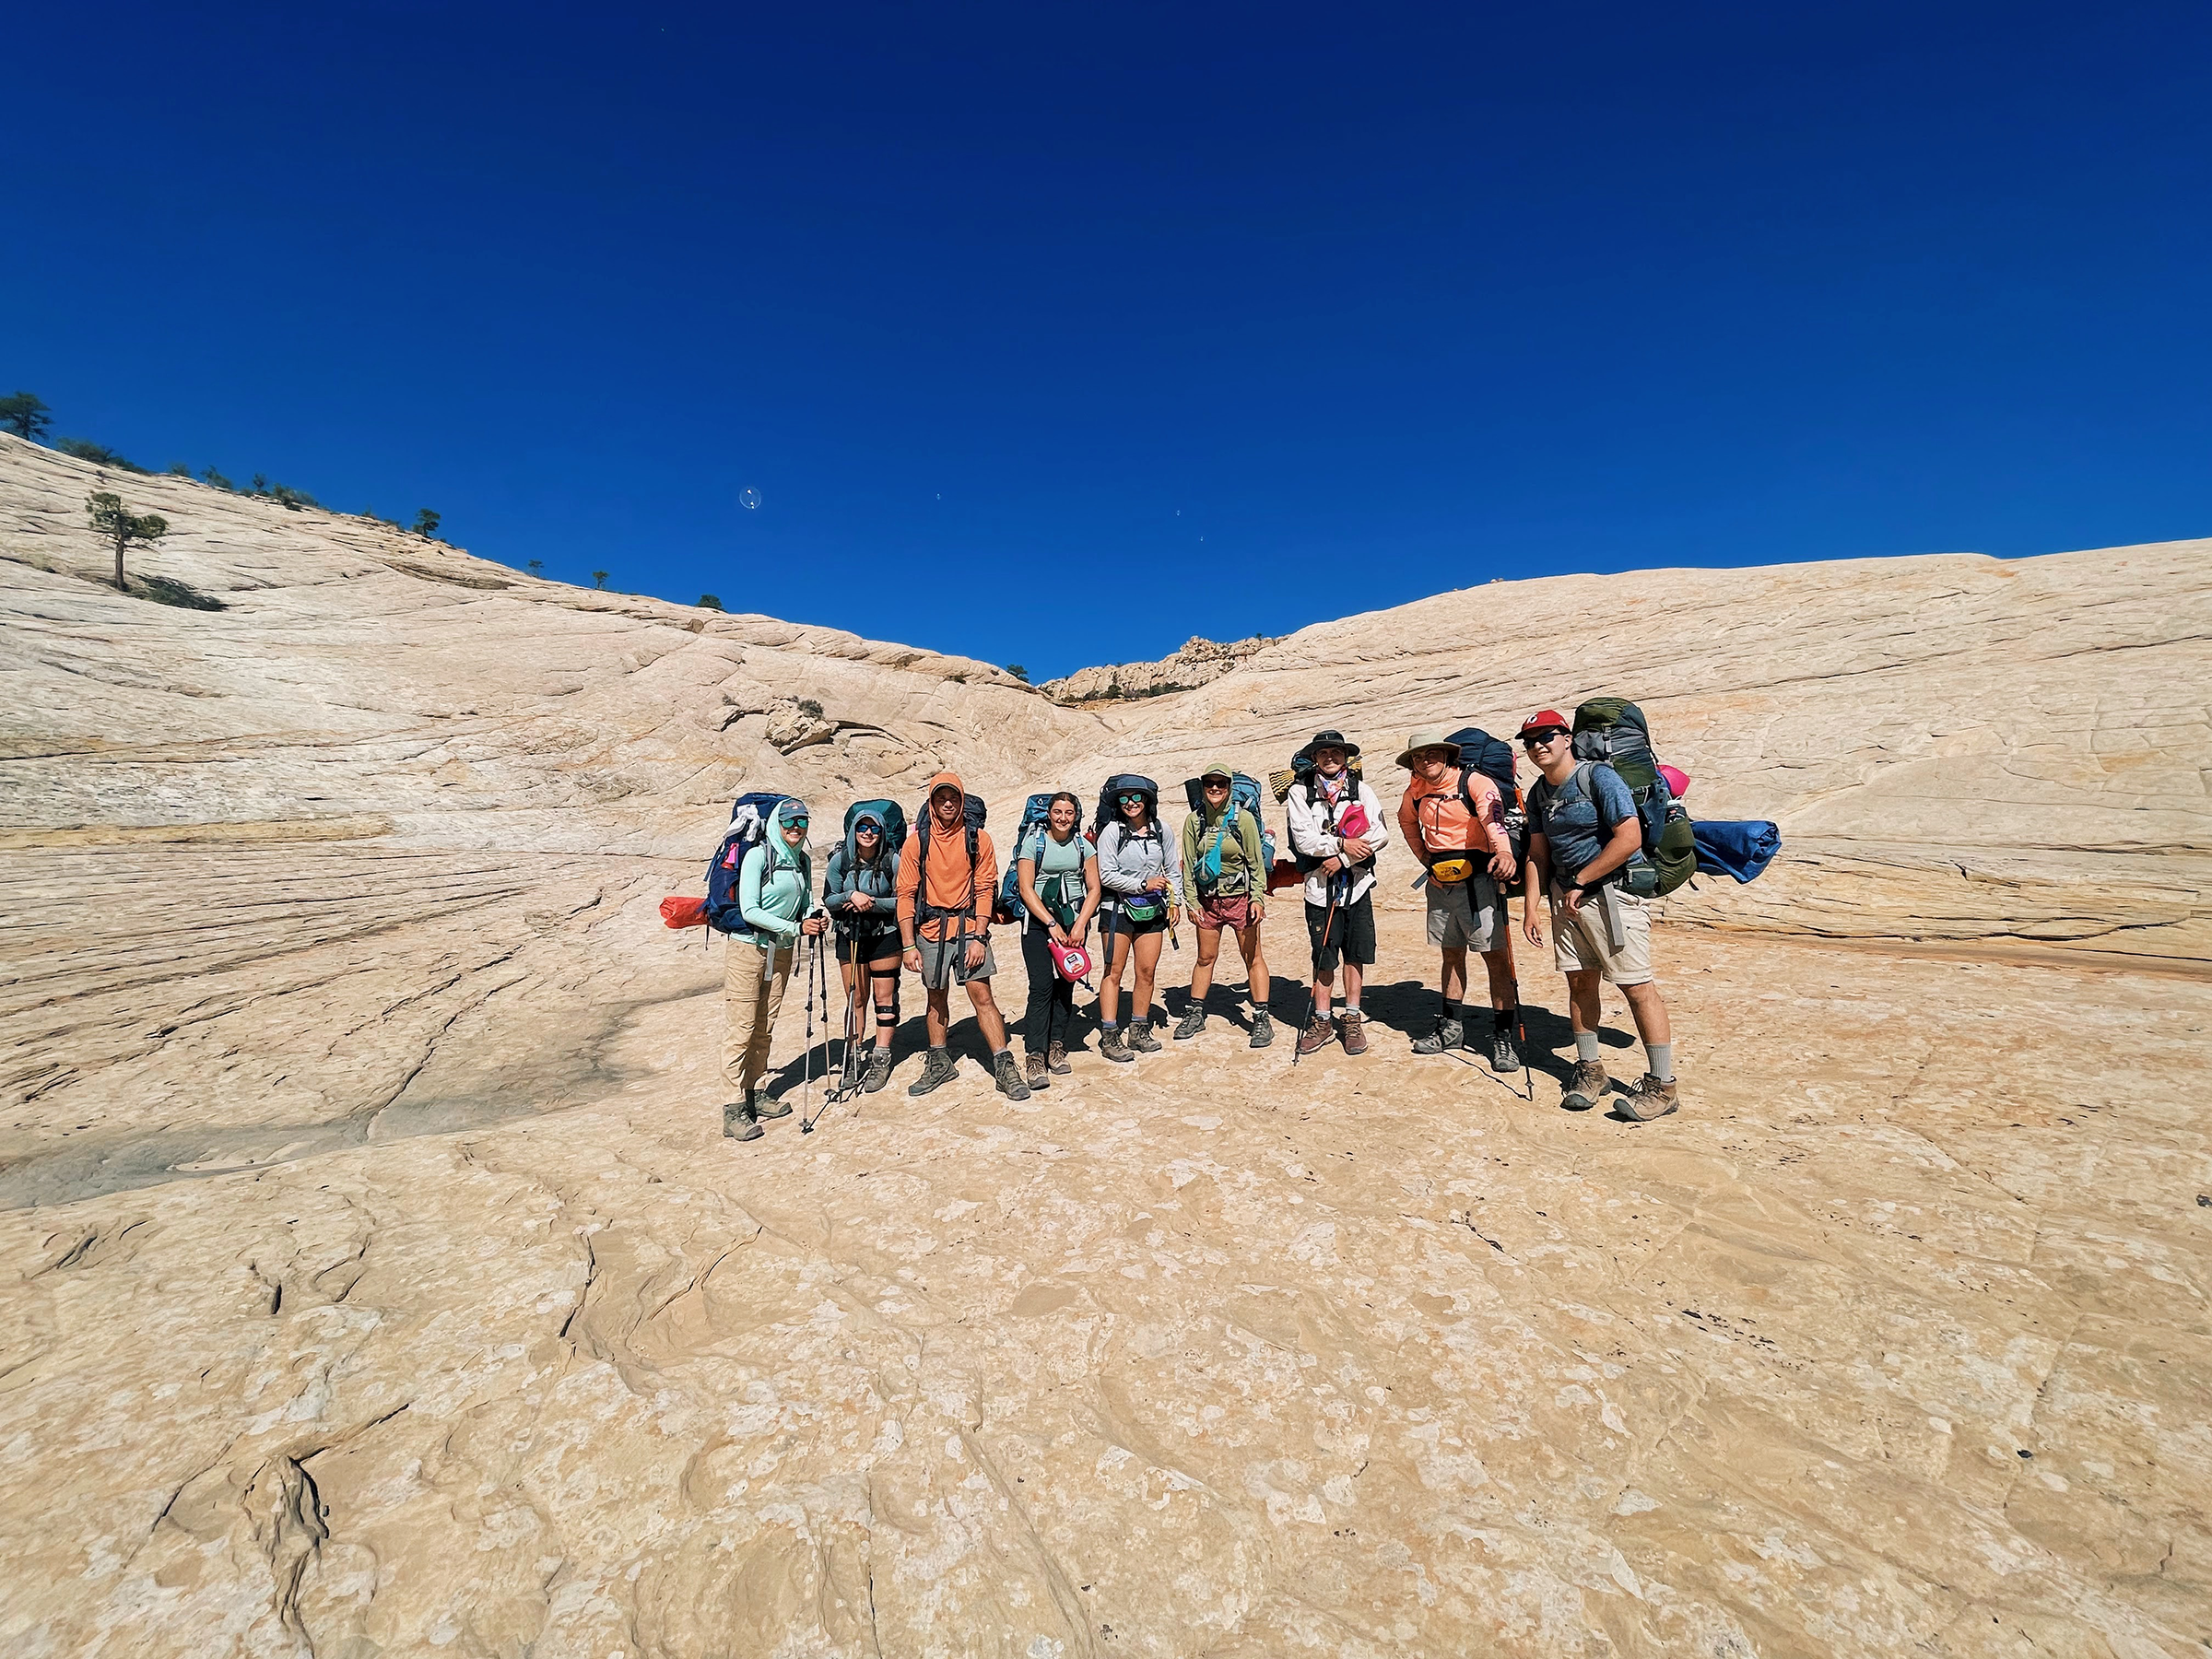 Group of people backpacking in the desert.